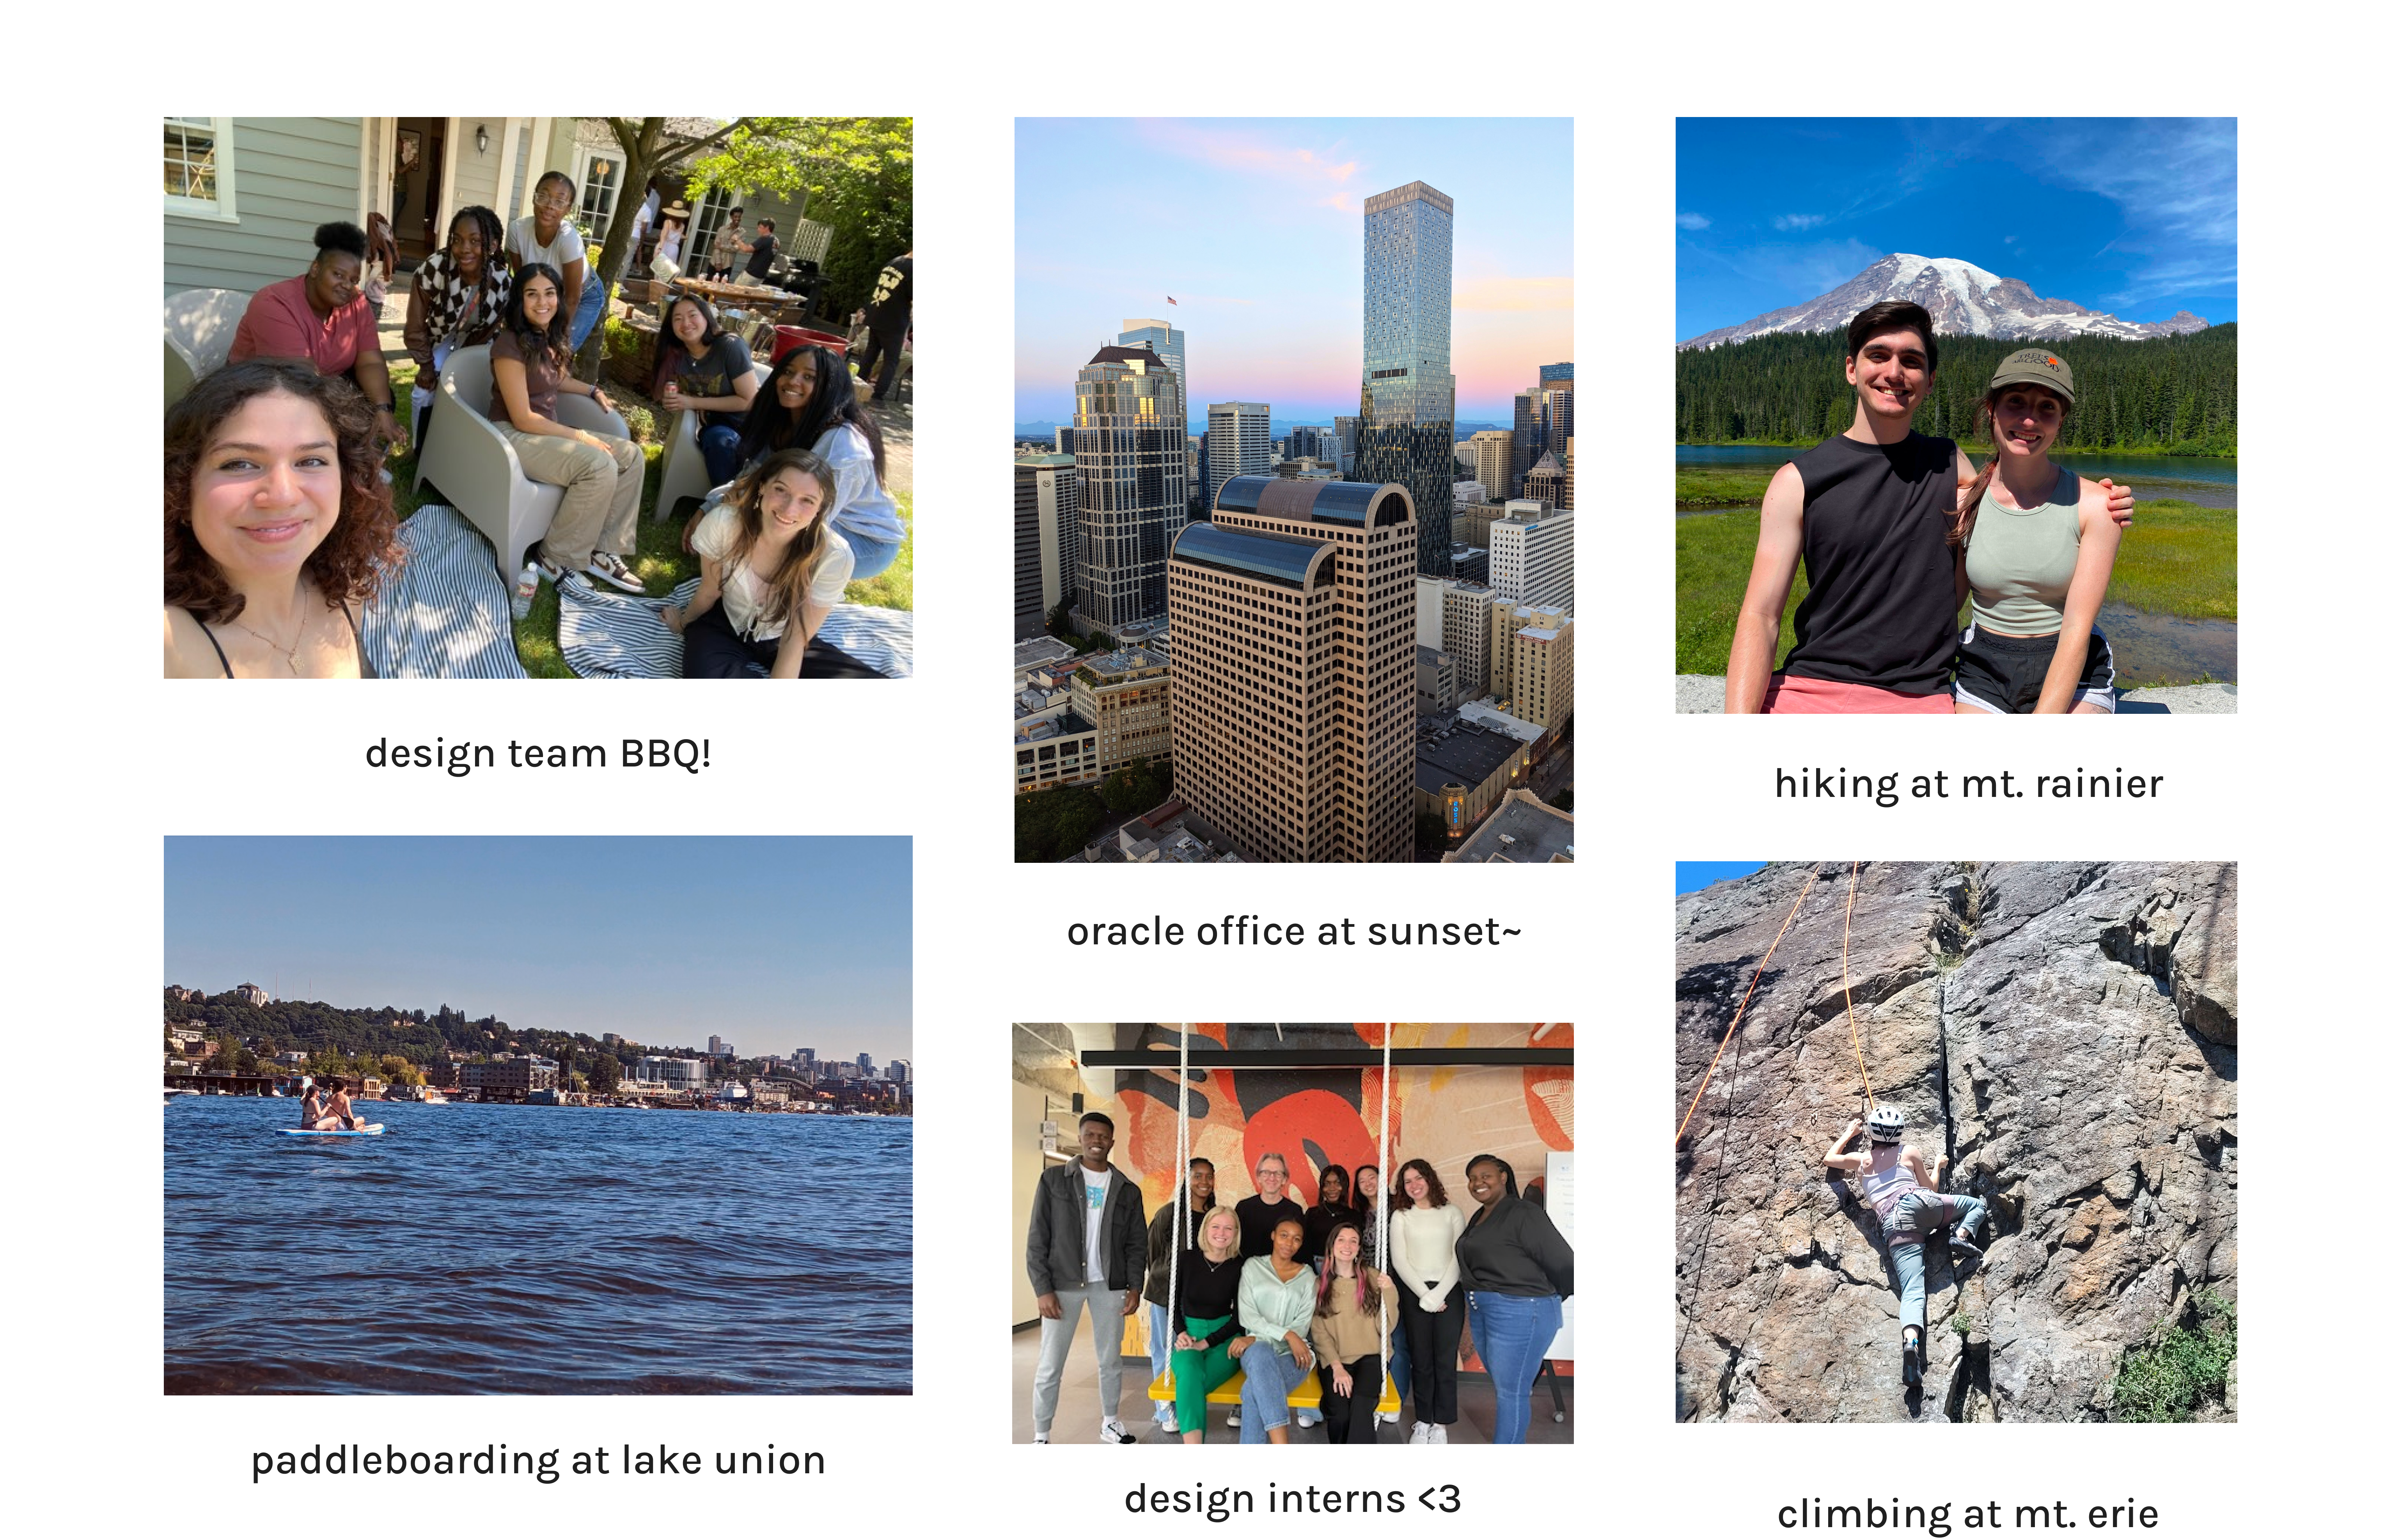 A photo collage of Evie's summer in Seattle: a group photo of the design interns, a photo of the oracle offices, a photo of Evie at Mt. Rainier and climbing at Mt. Erie, and a photo of two people paddleboarding in Lake Union